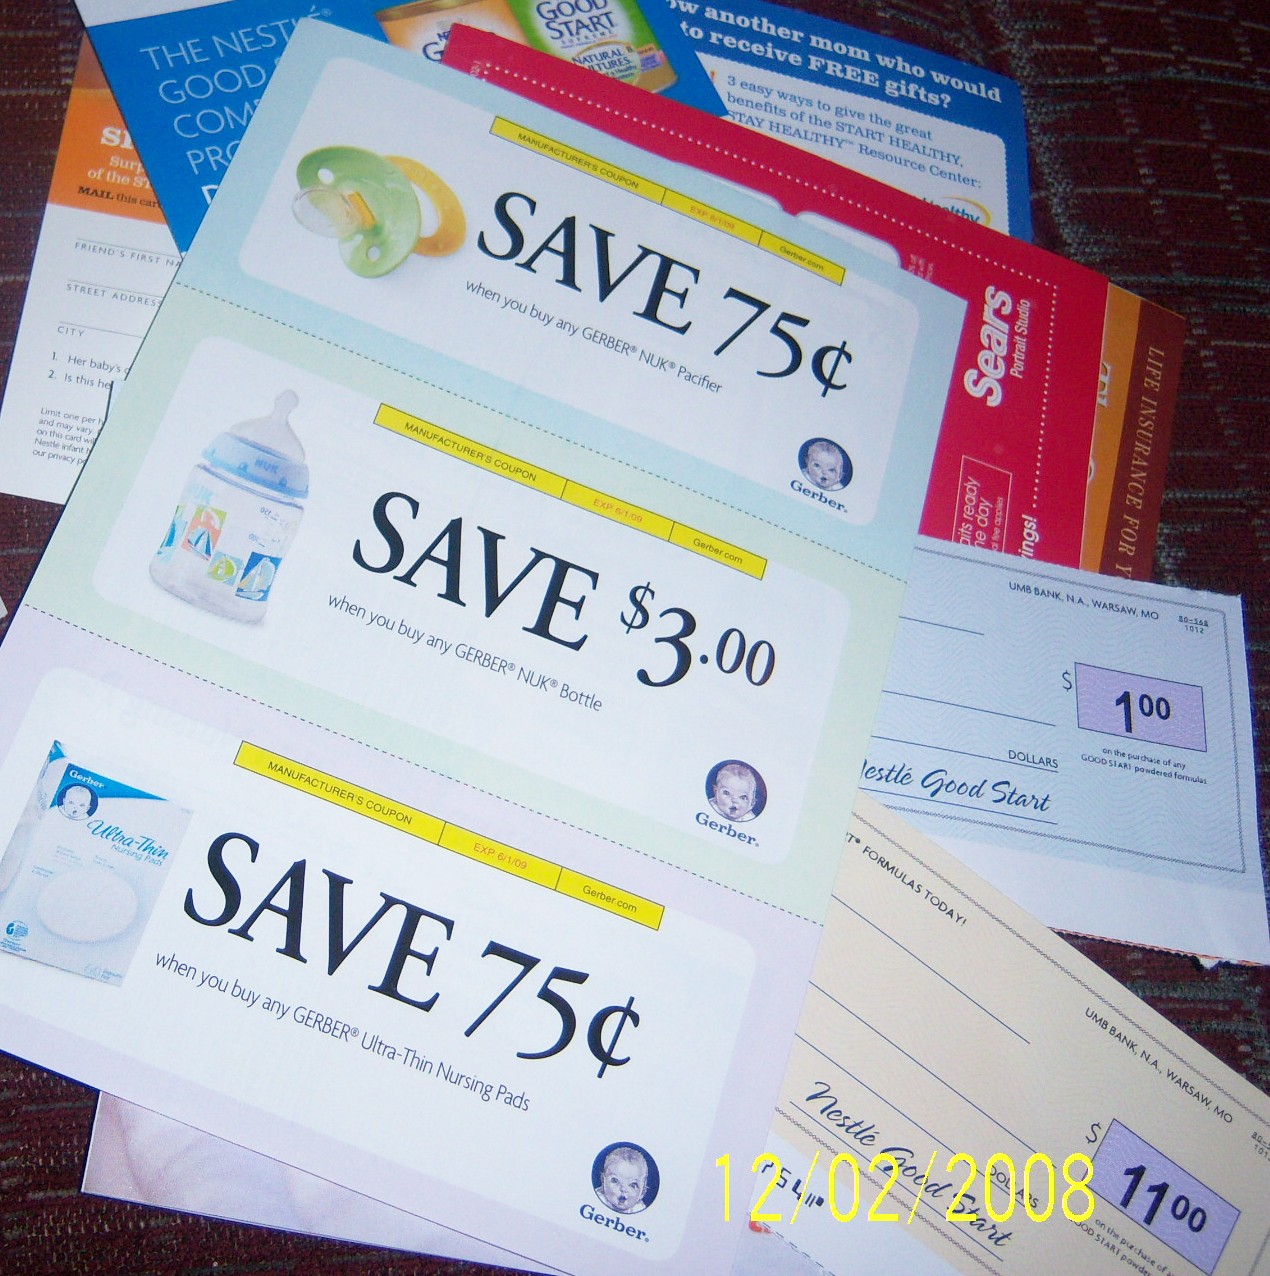 Nestle Good Start and Gerber coupons